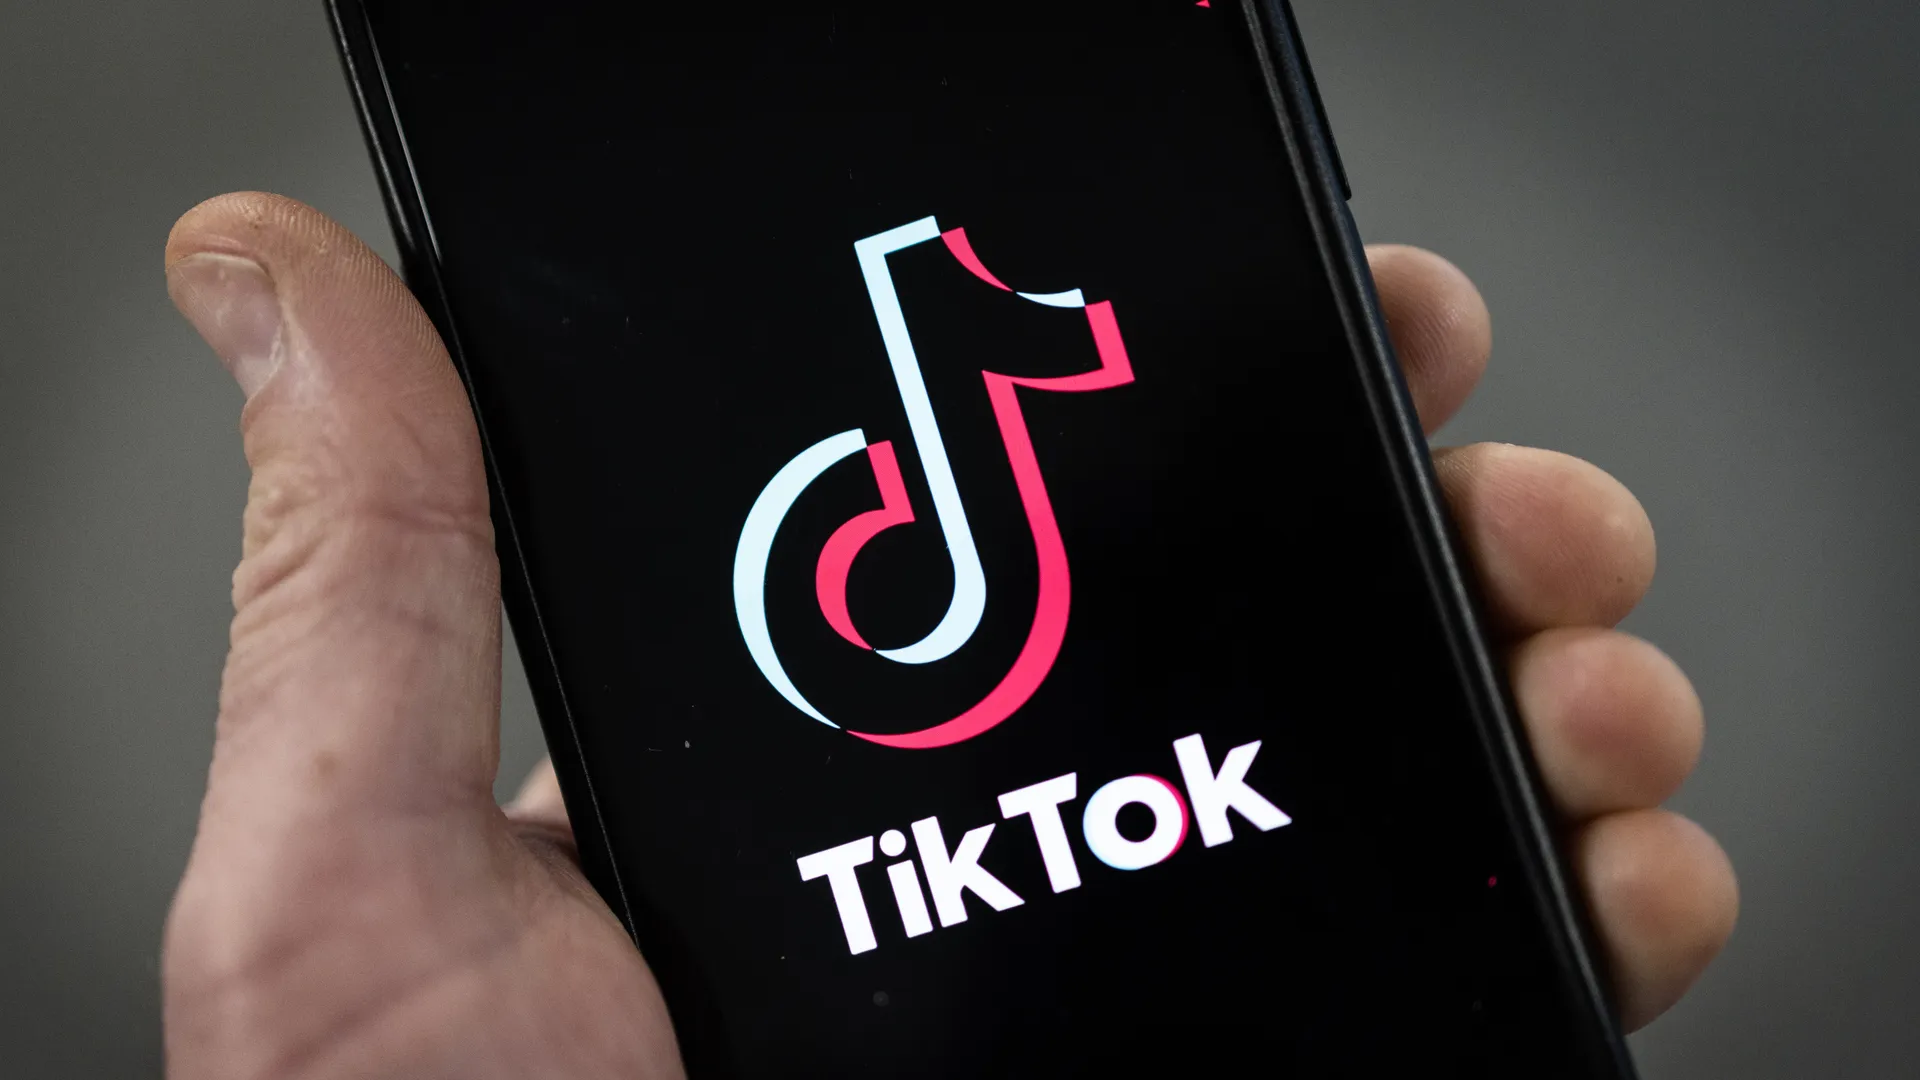 Montana is the first US state to ban TikTok entirely